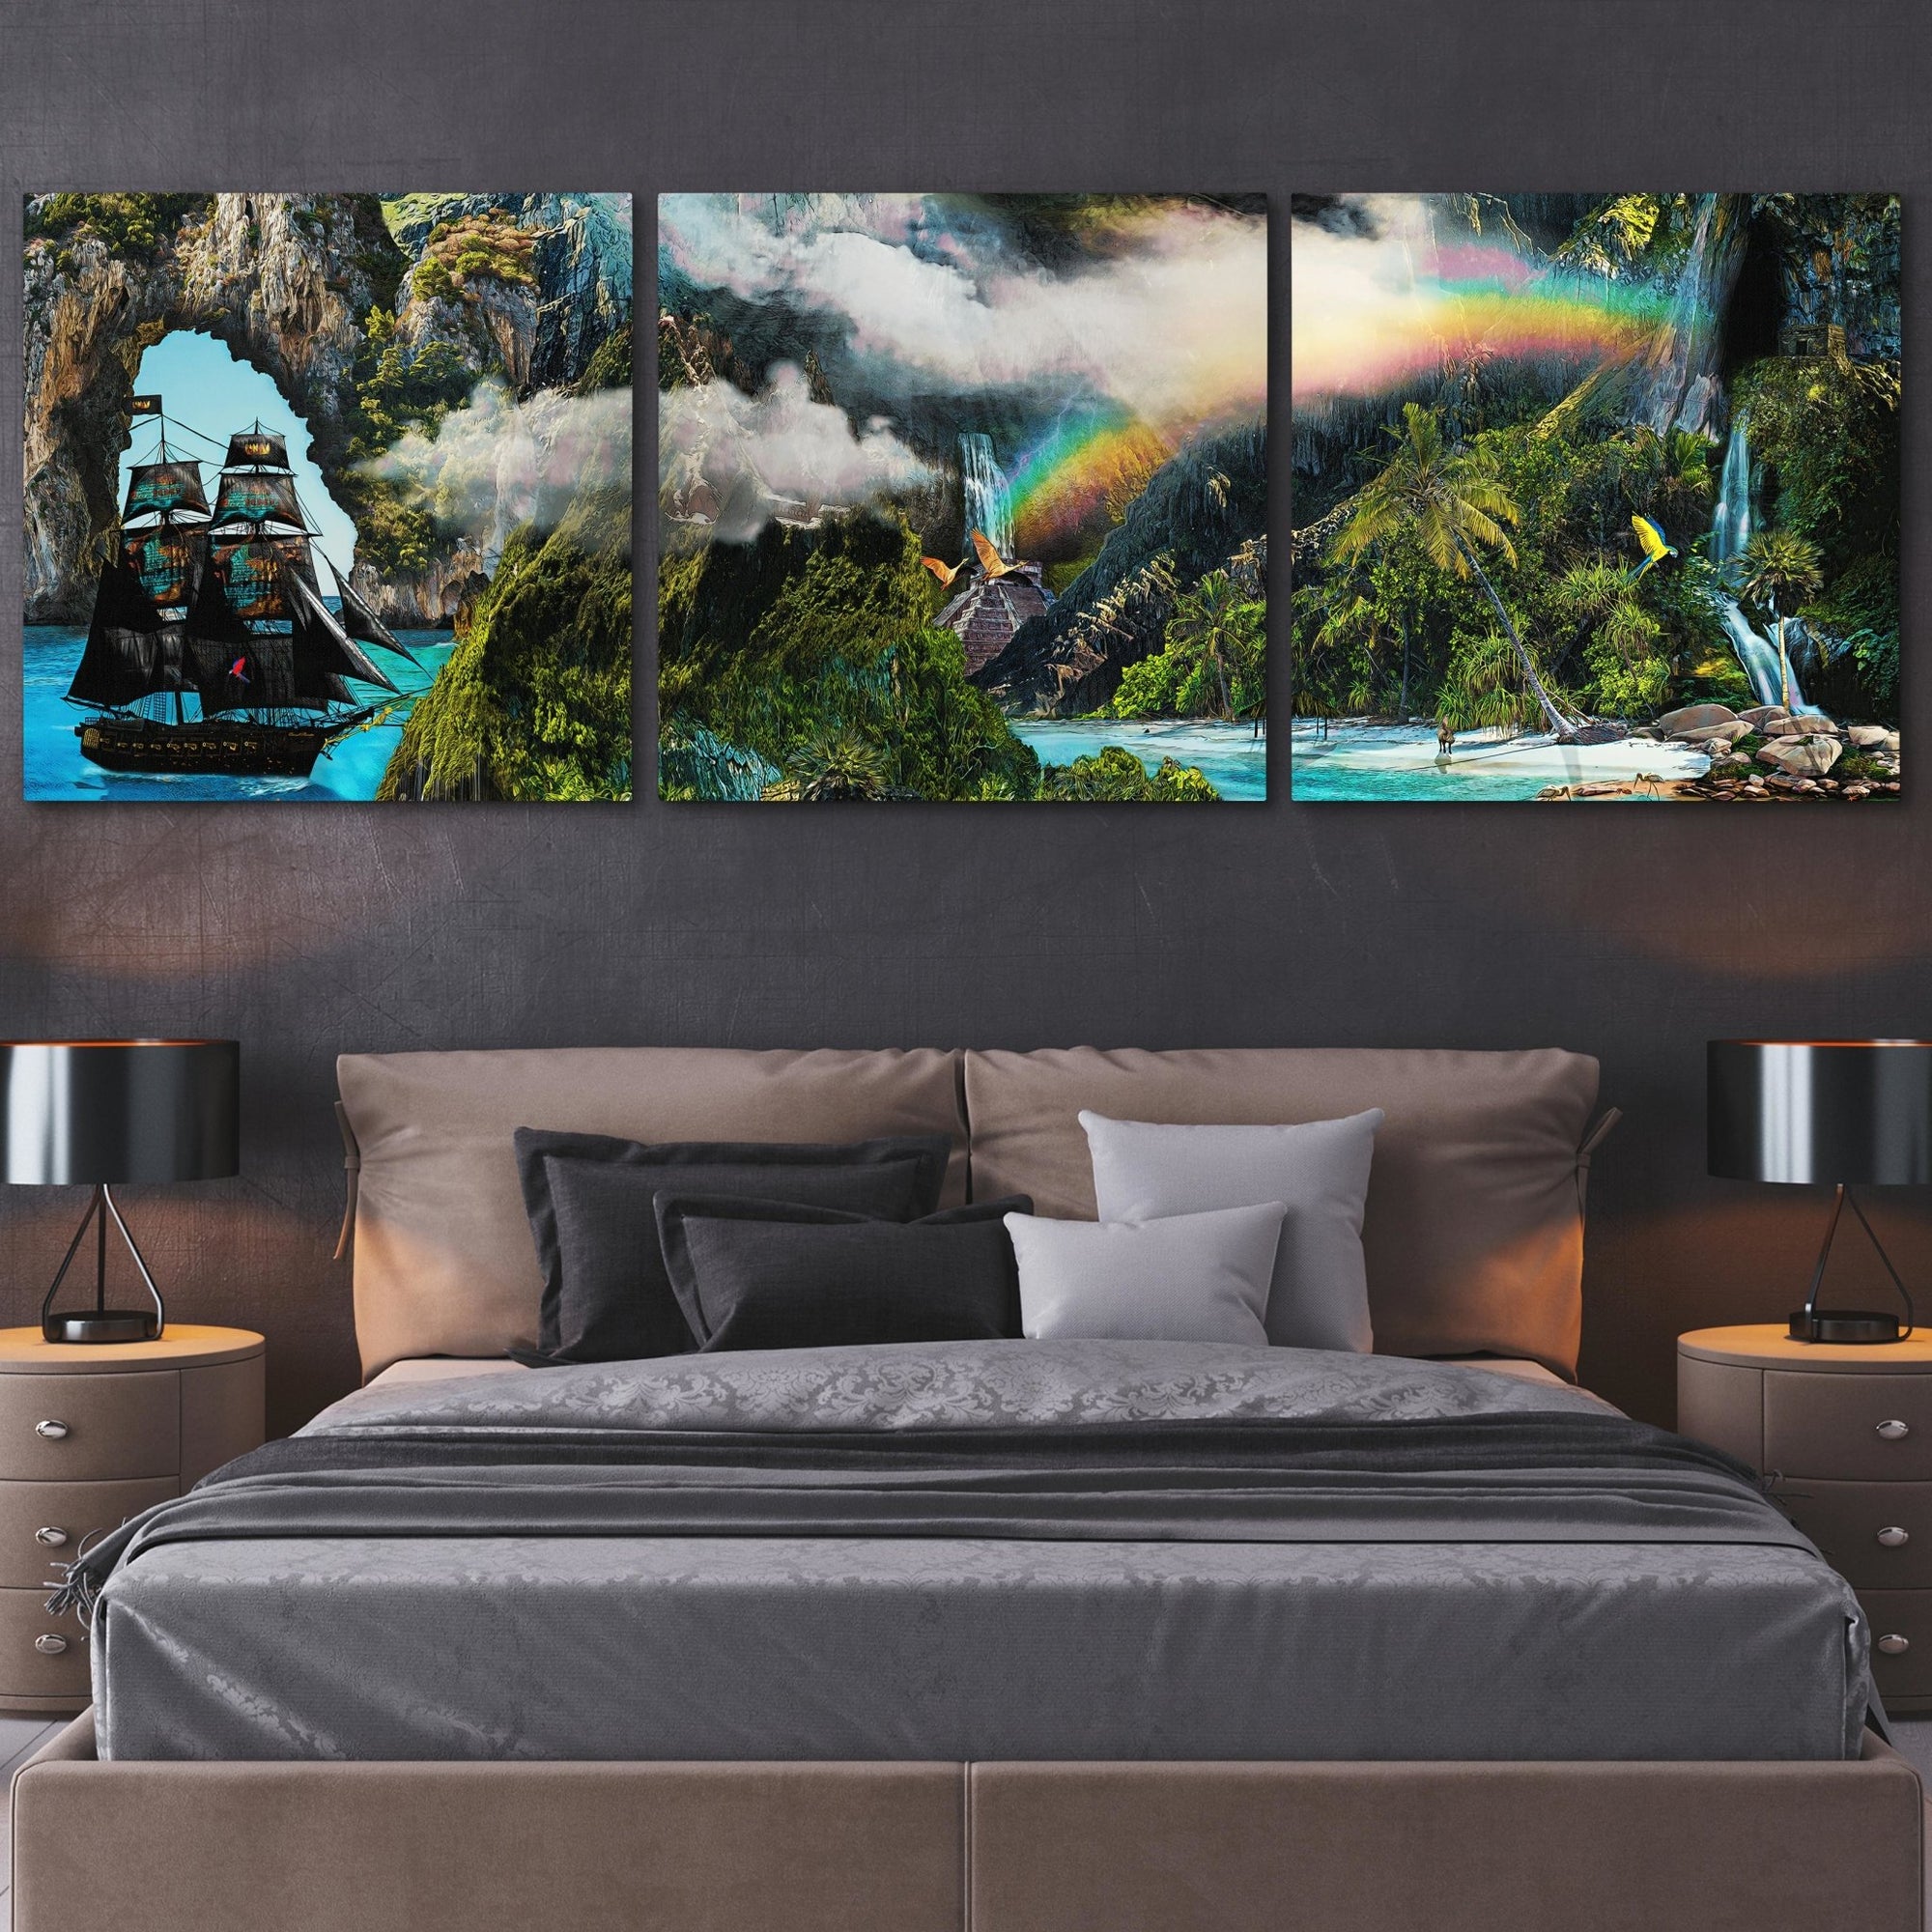 Pirate's Cove 3 Piece Set [A1-A3] - Thedopeart Canvas